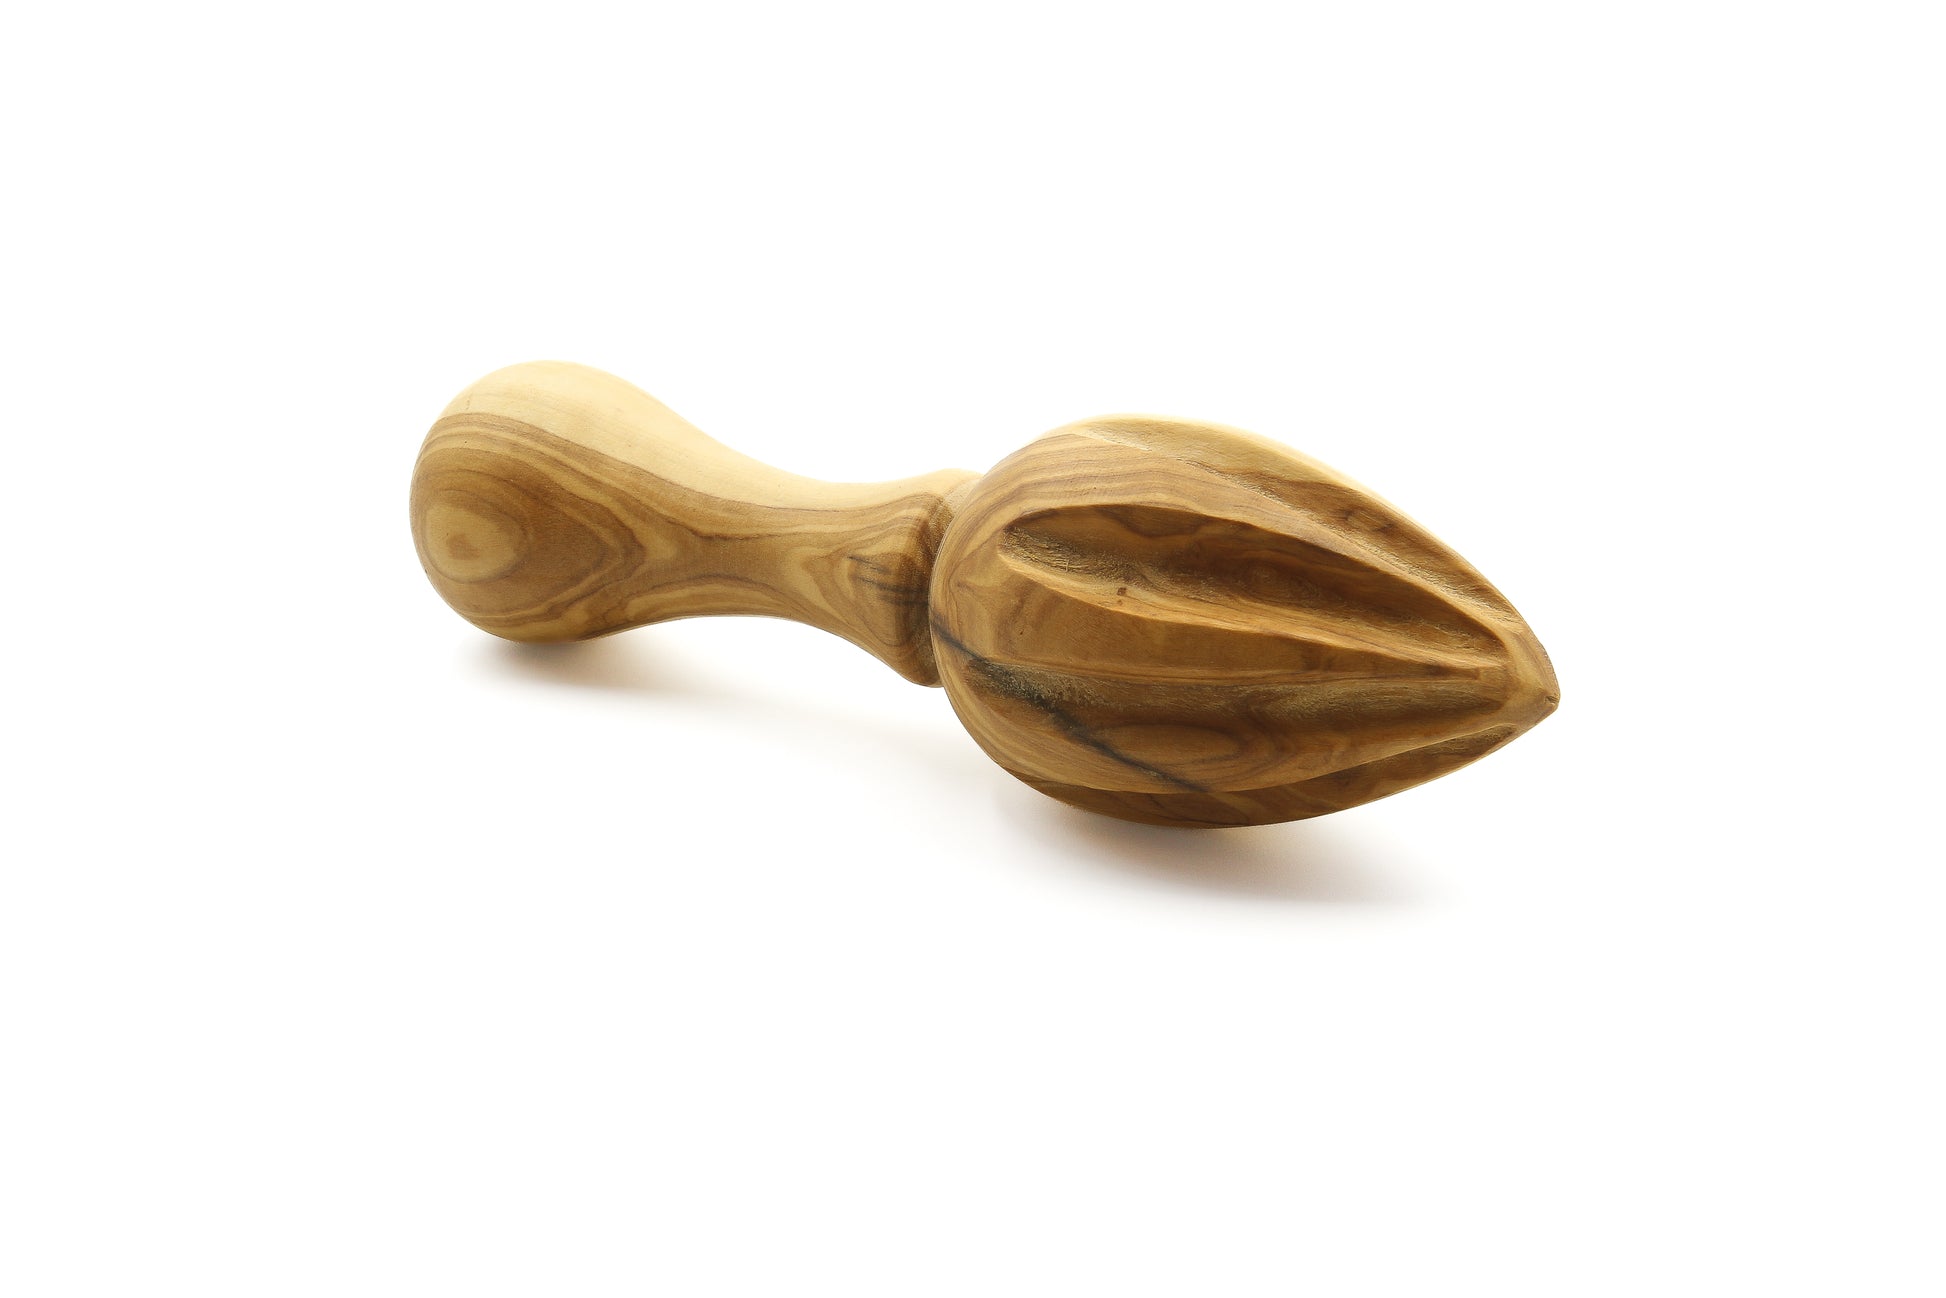 Hand-finished olive wood kitchen utensil for juicing fruits